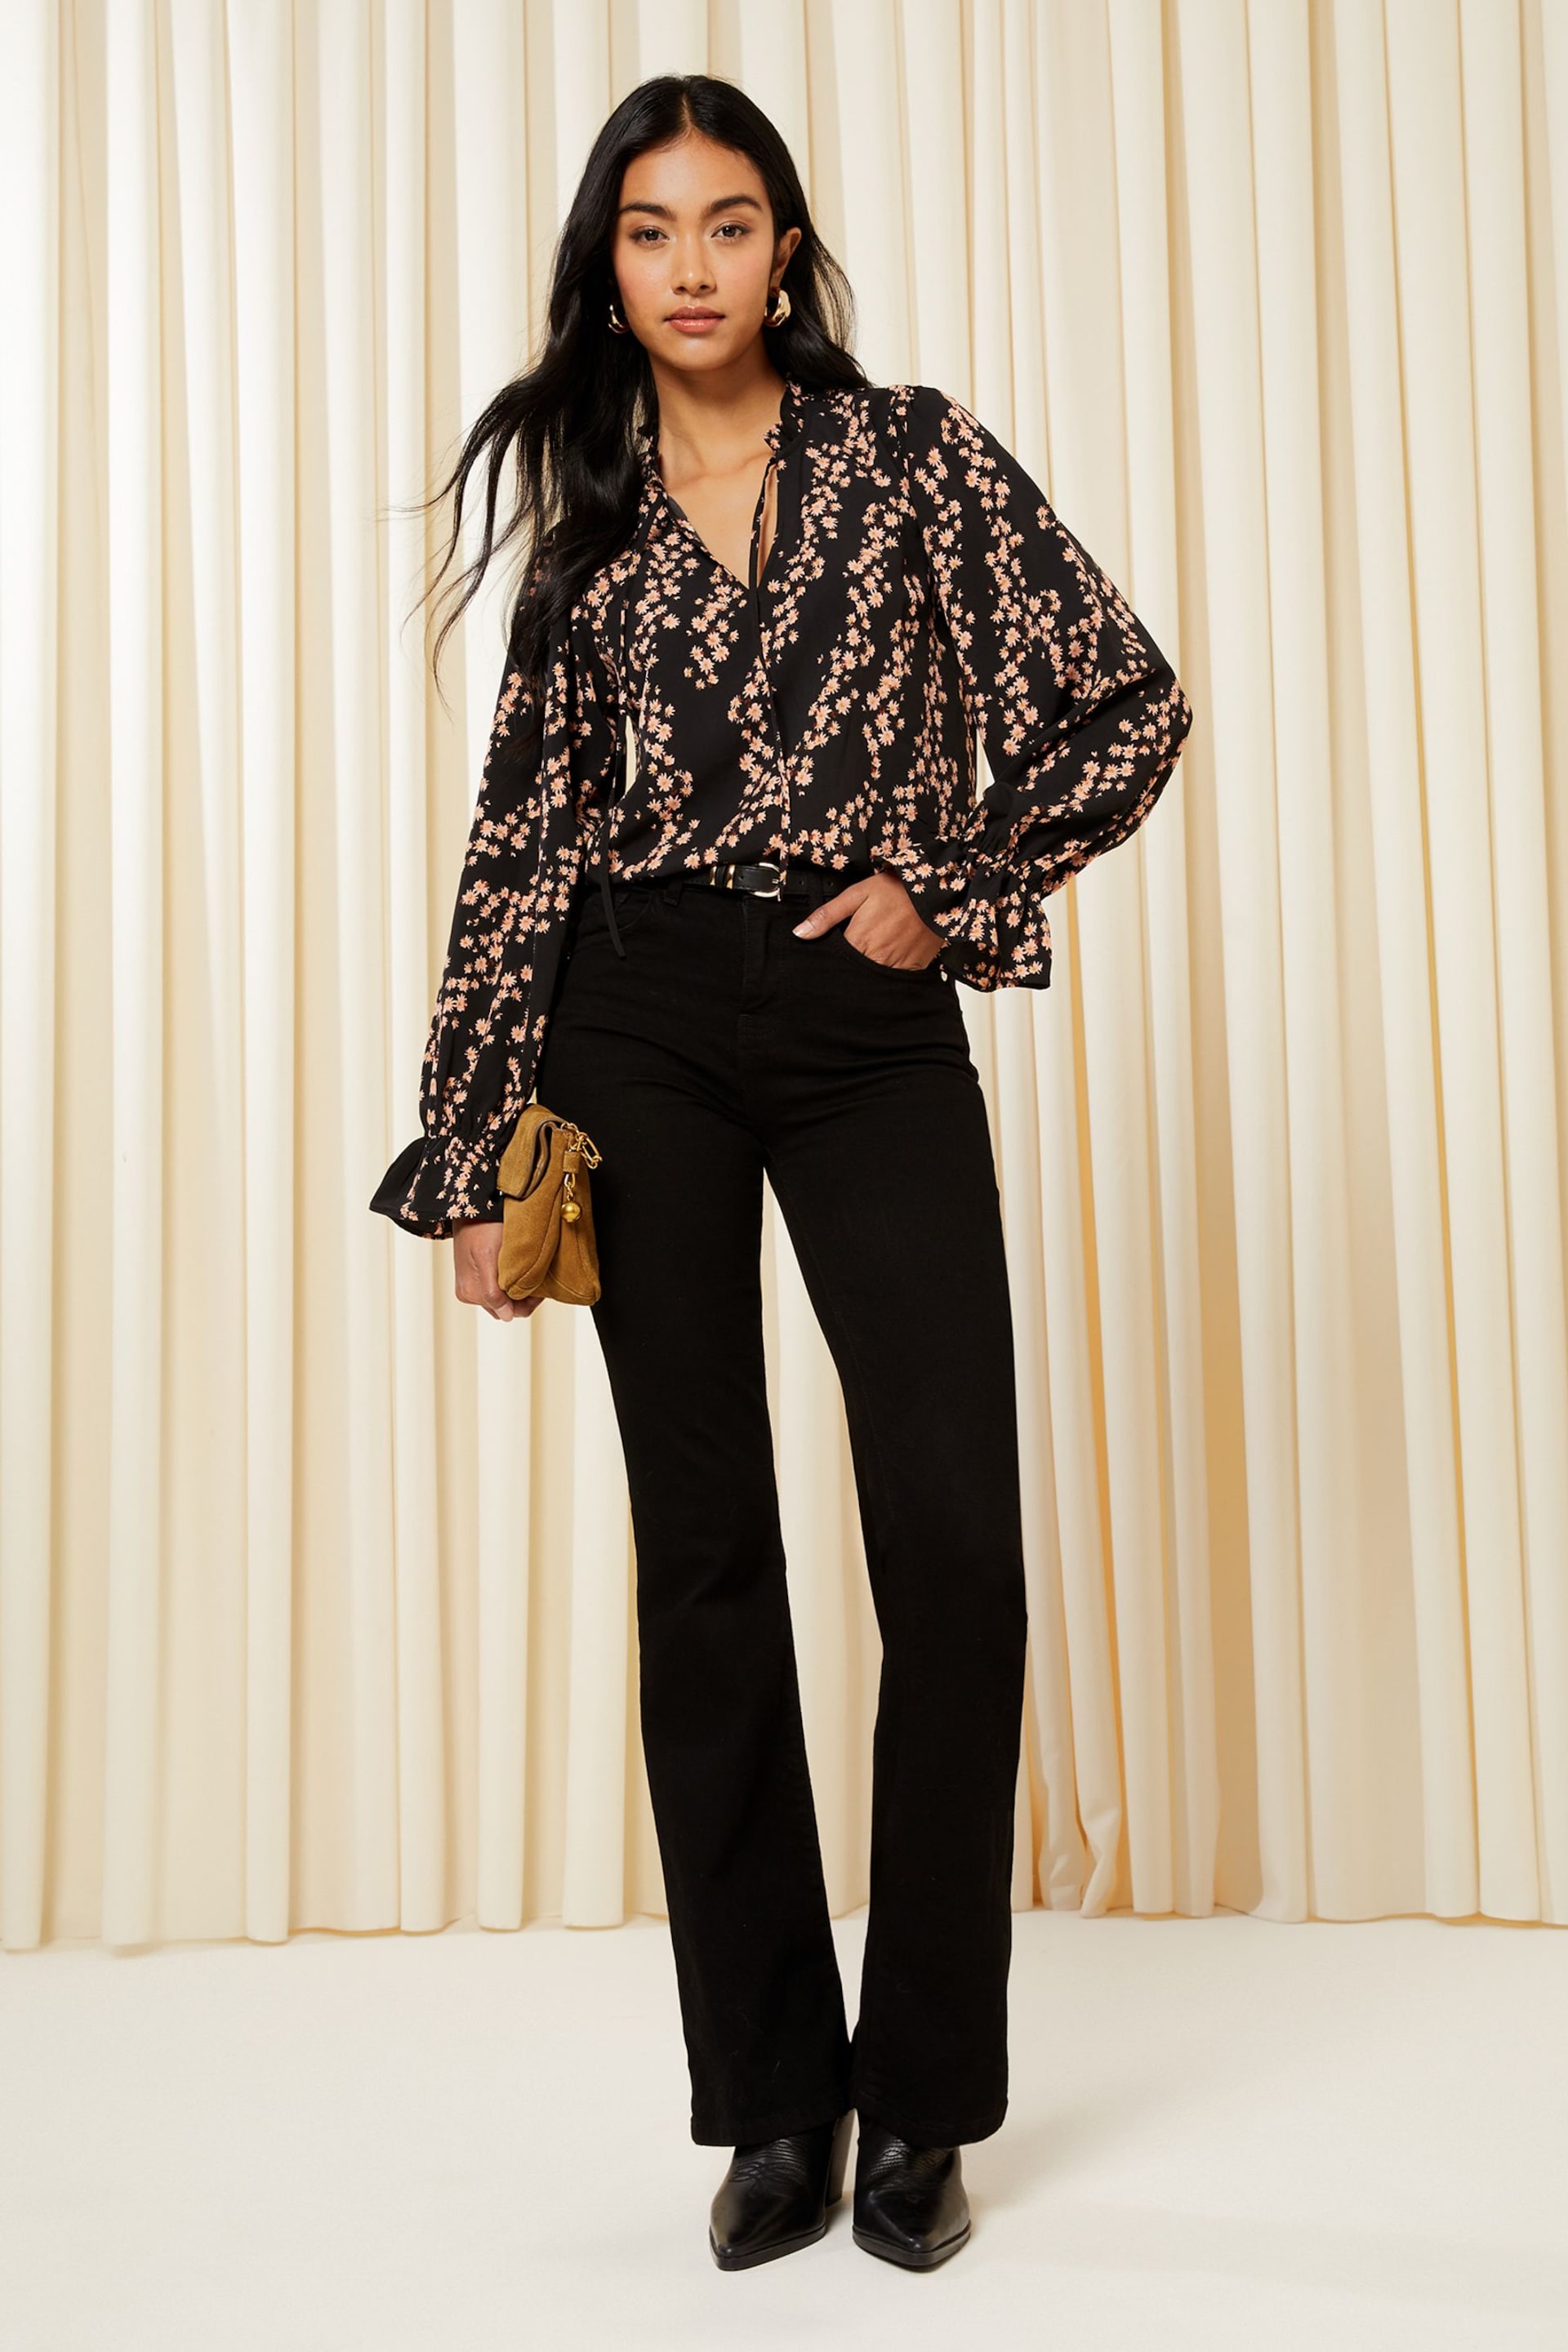 Friends Like These Black Floral Long Sleeve Tie Neck Blouse - Image 2 of 4